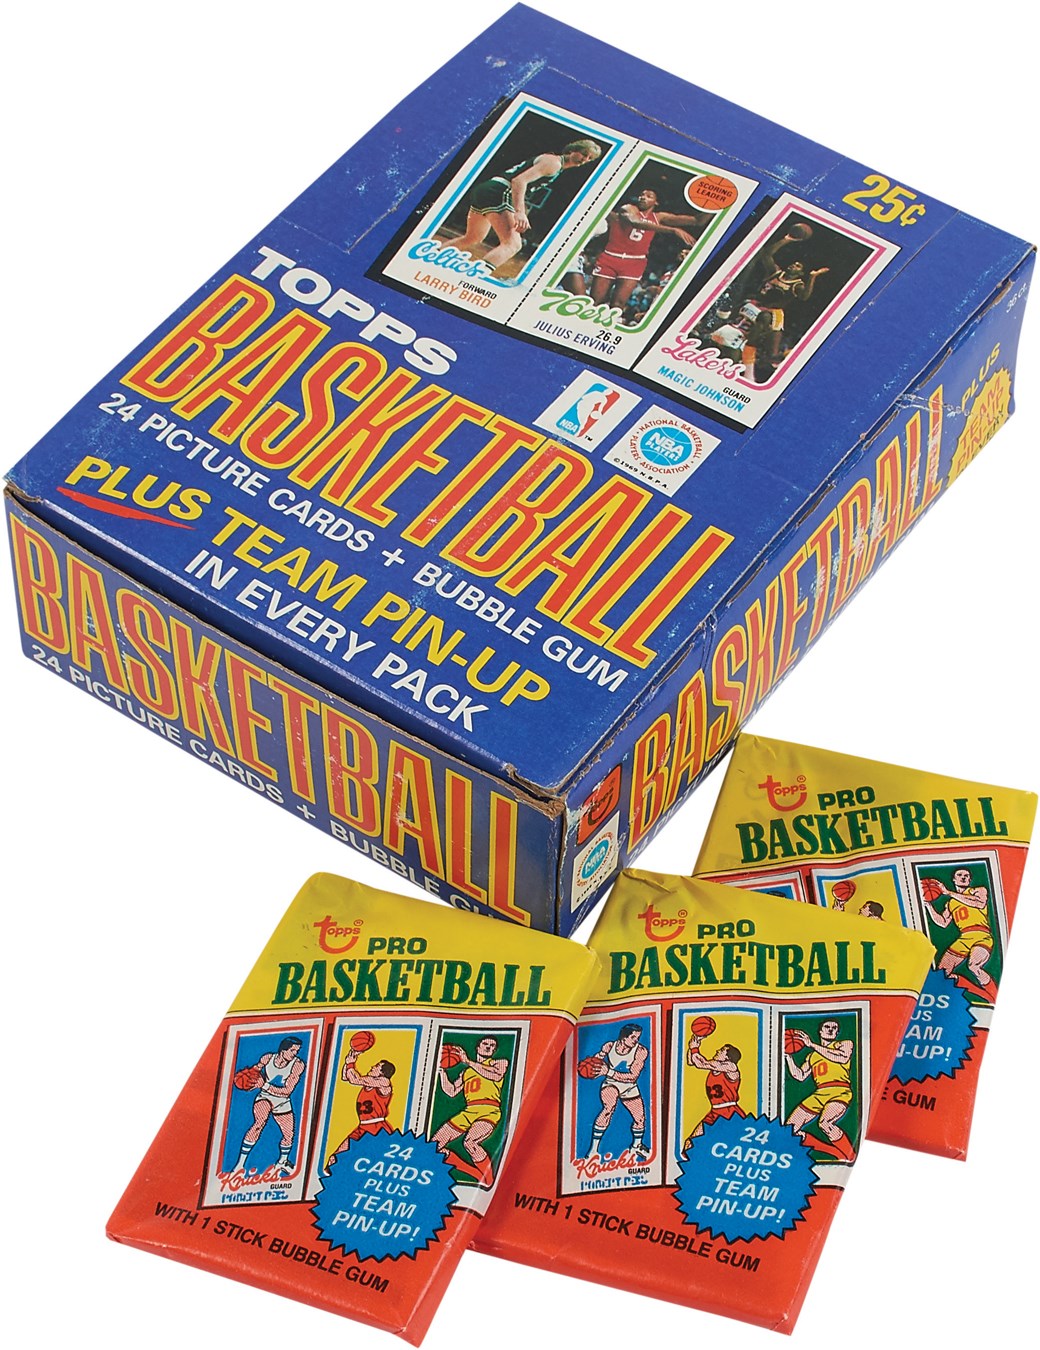 Baseball and Trading Cards - 1980-81 Topps Basketball Wax Box with 36 Unopened Packs